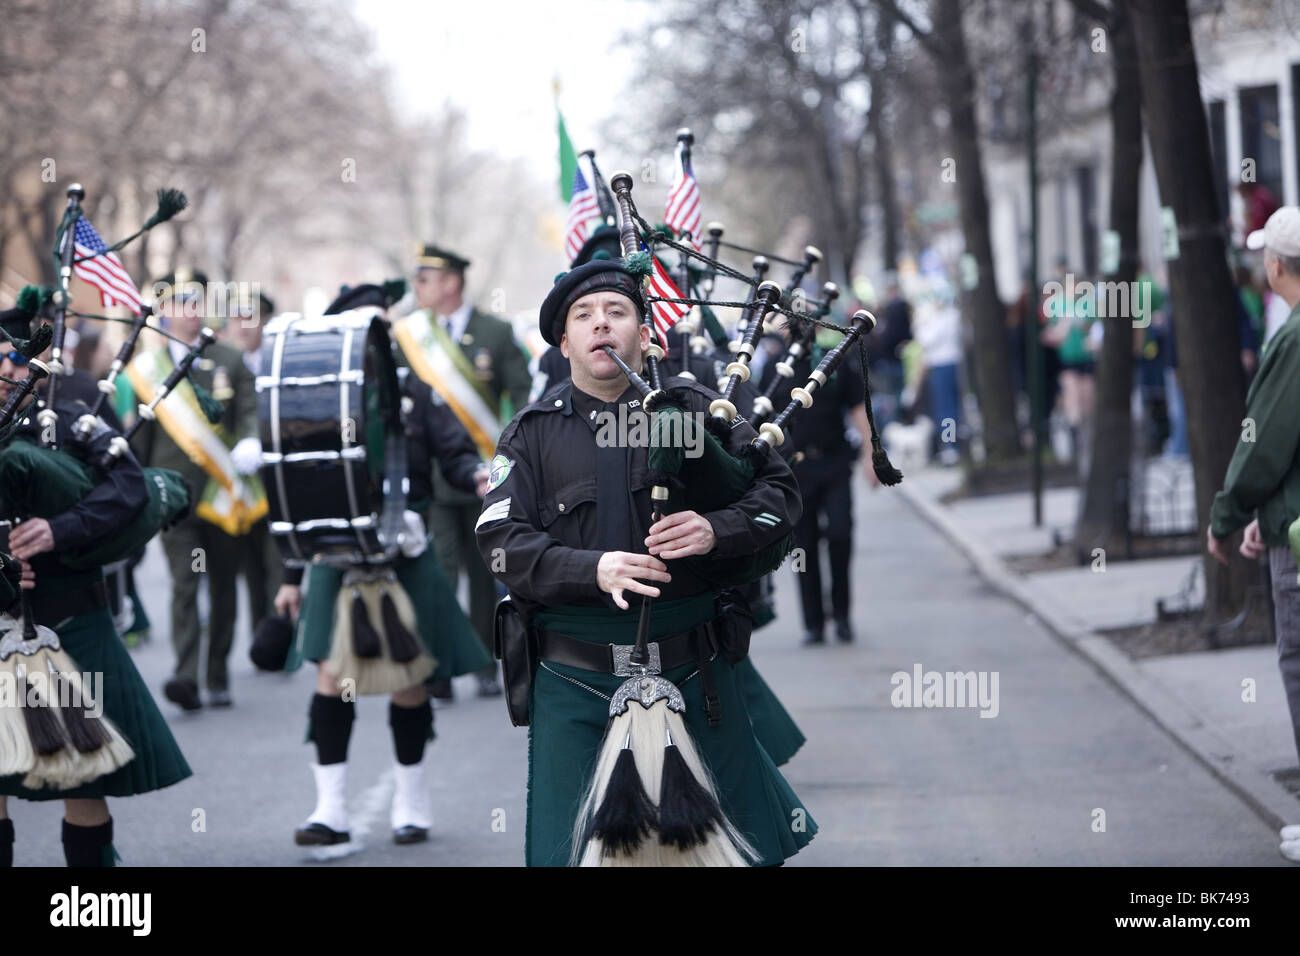 Brooklyn Irish American Day Parade takes place close to Saint Patrick's Day each year in Park Slope, Brooklyn, NY Stock Photo